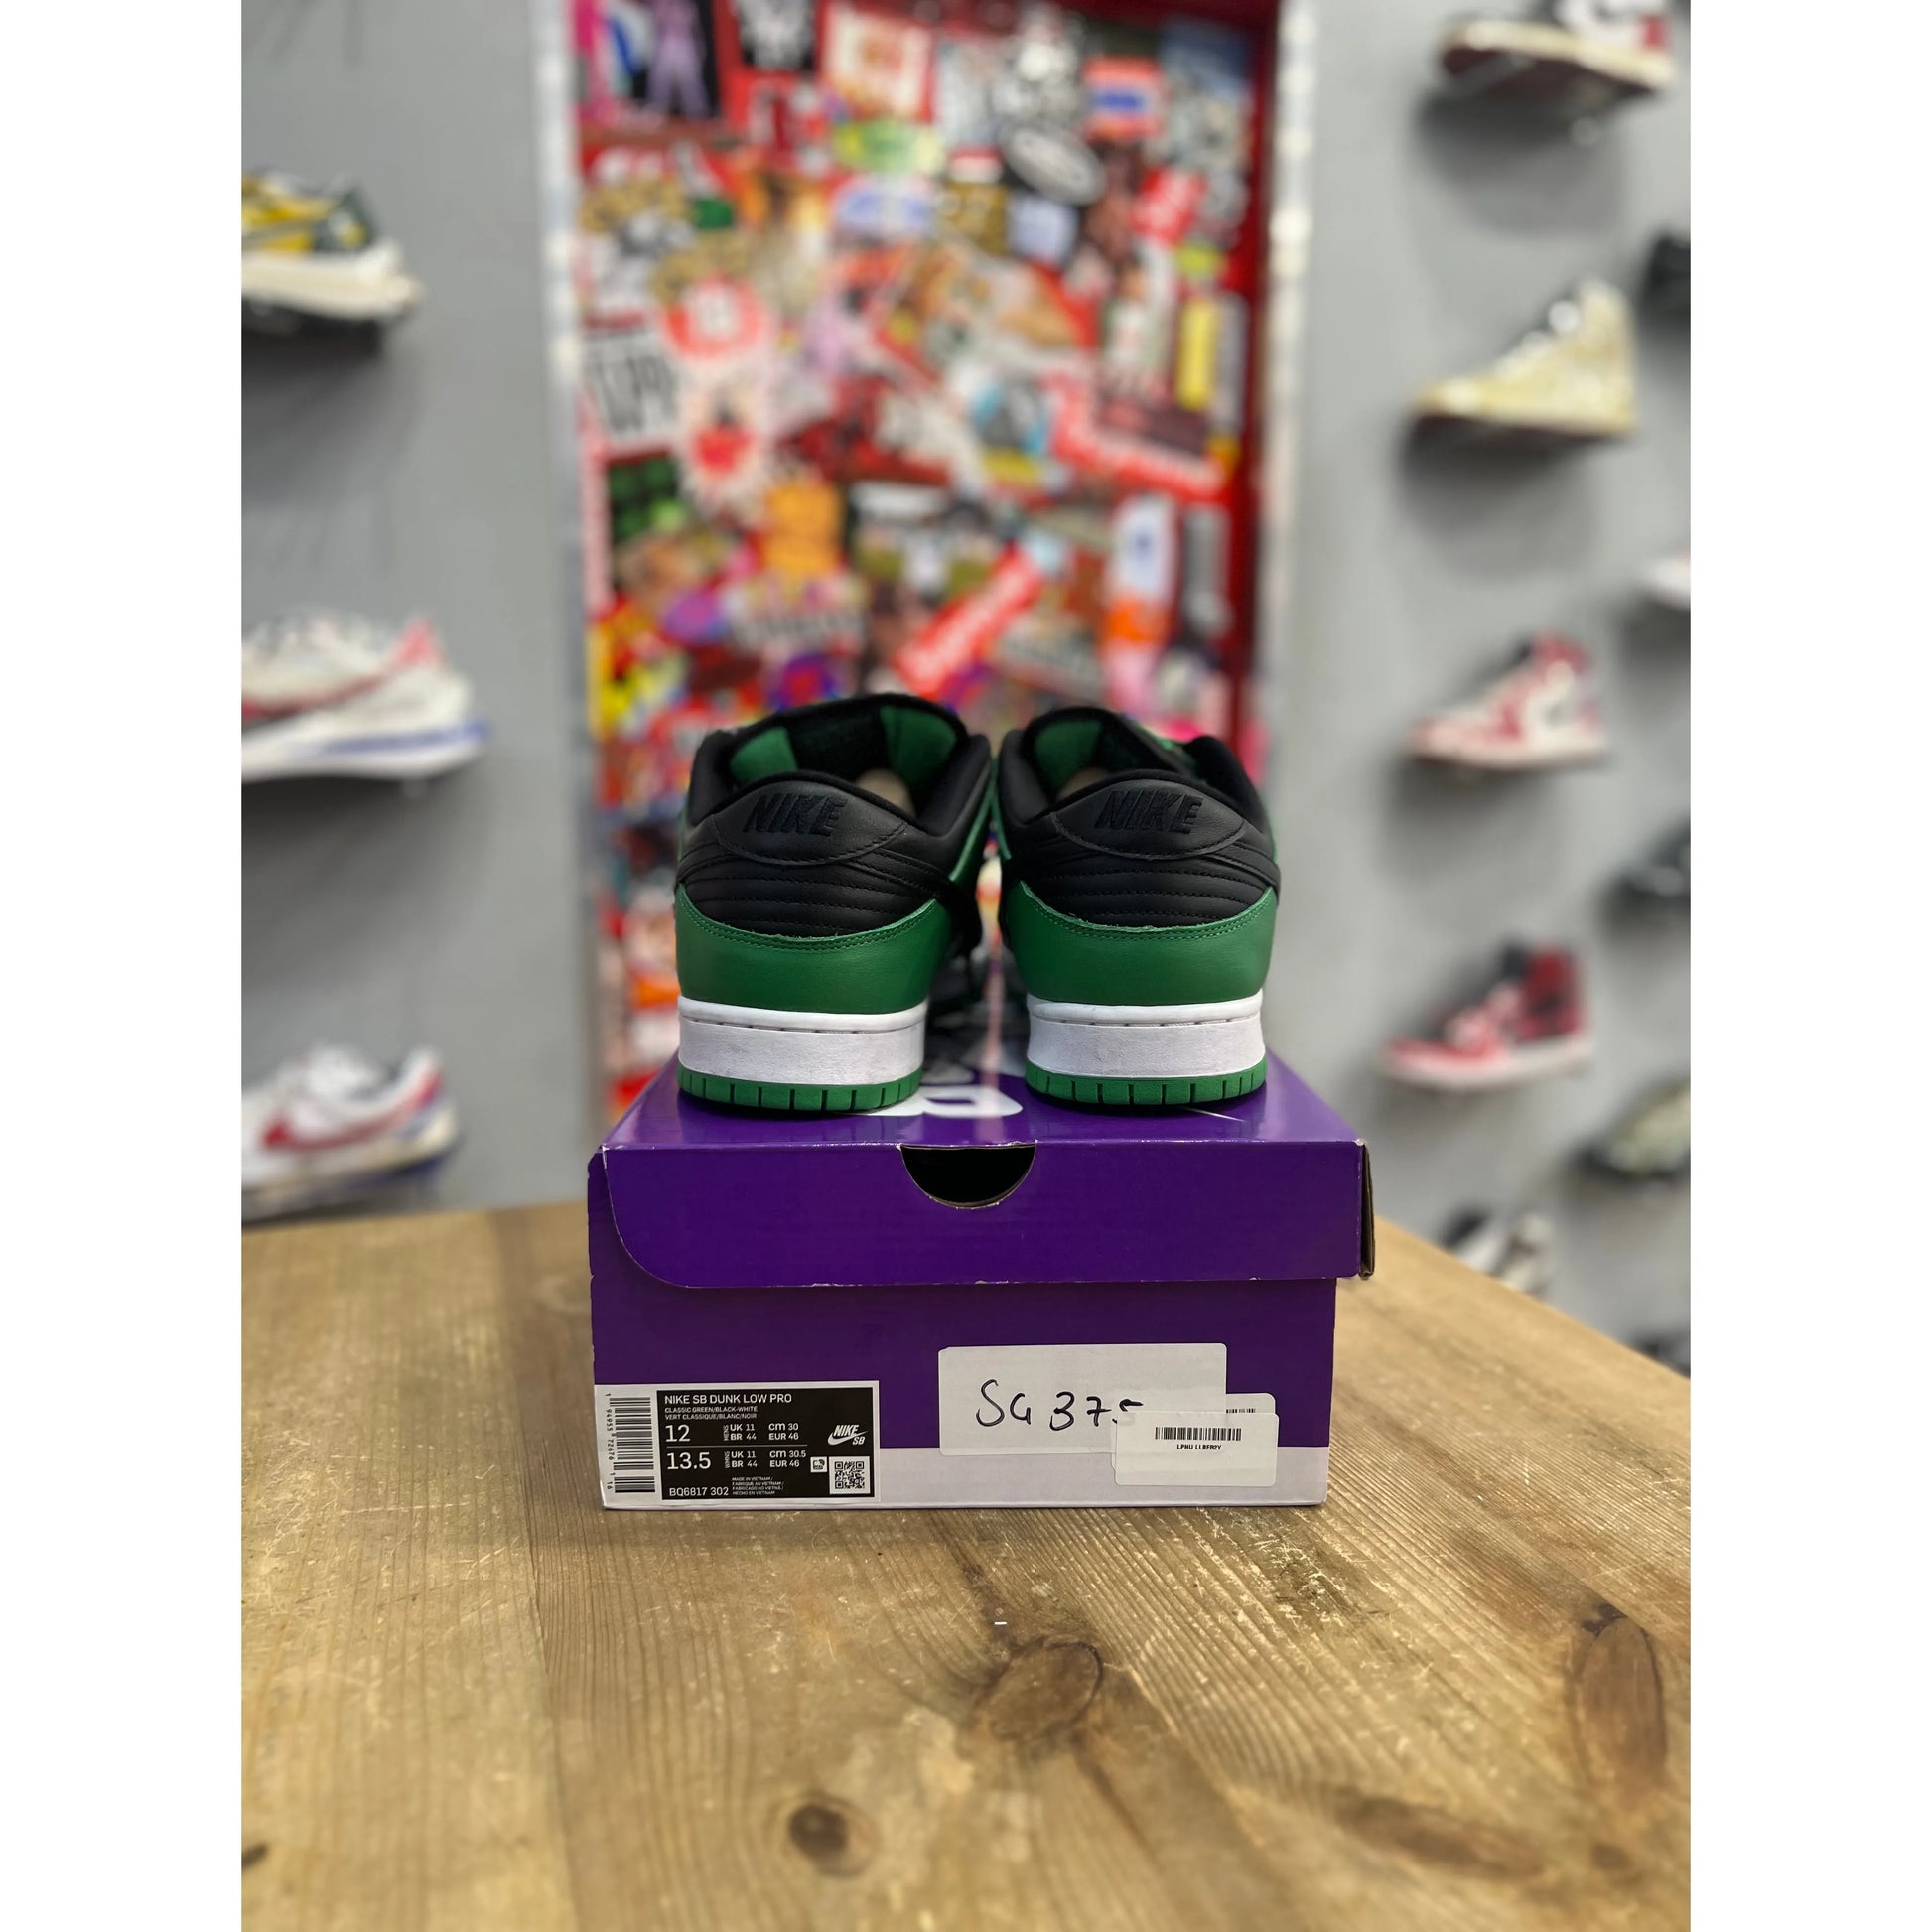 Nike SB Dunk Low Classic Green UK 11 by Nike from £150.00